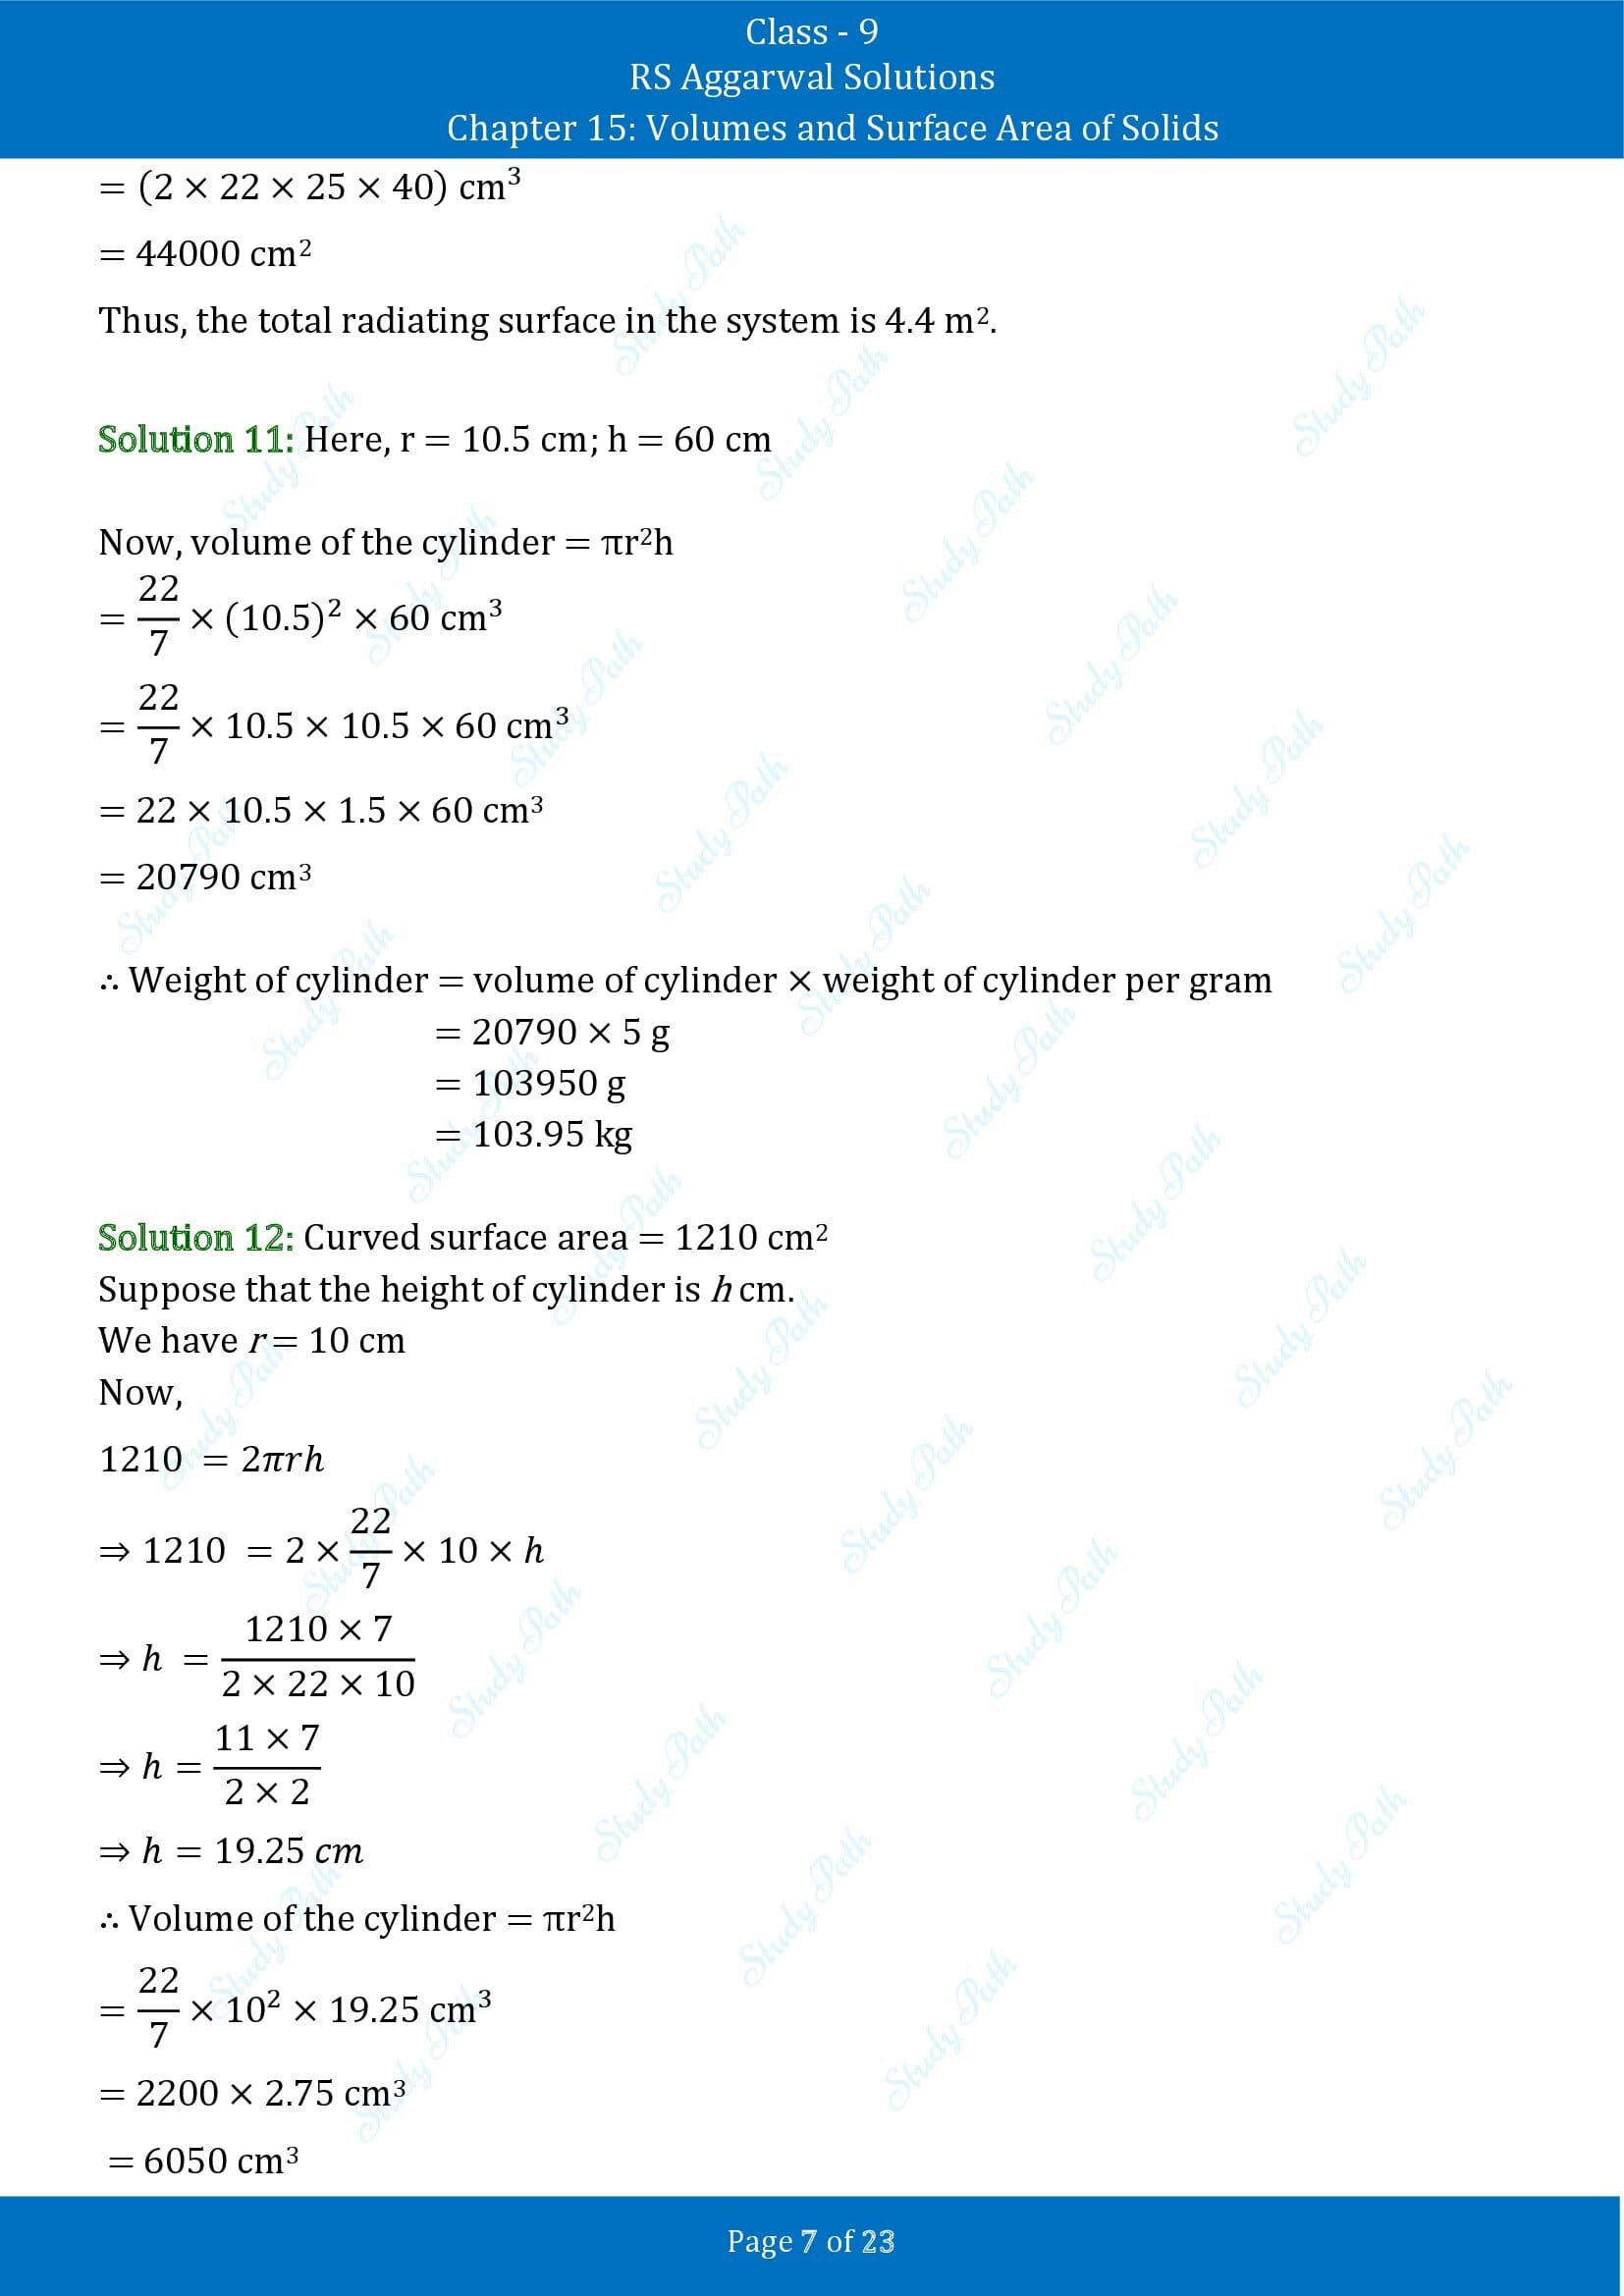 RS Aggarwal Solutions Class 9 Chapter 15 Volumes and Surface Area of Solids Exercise 15B 00007